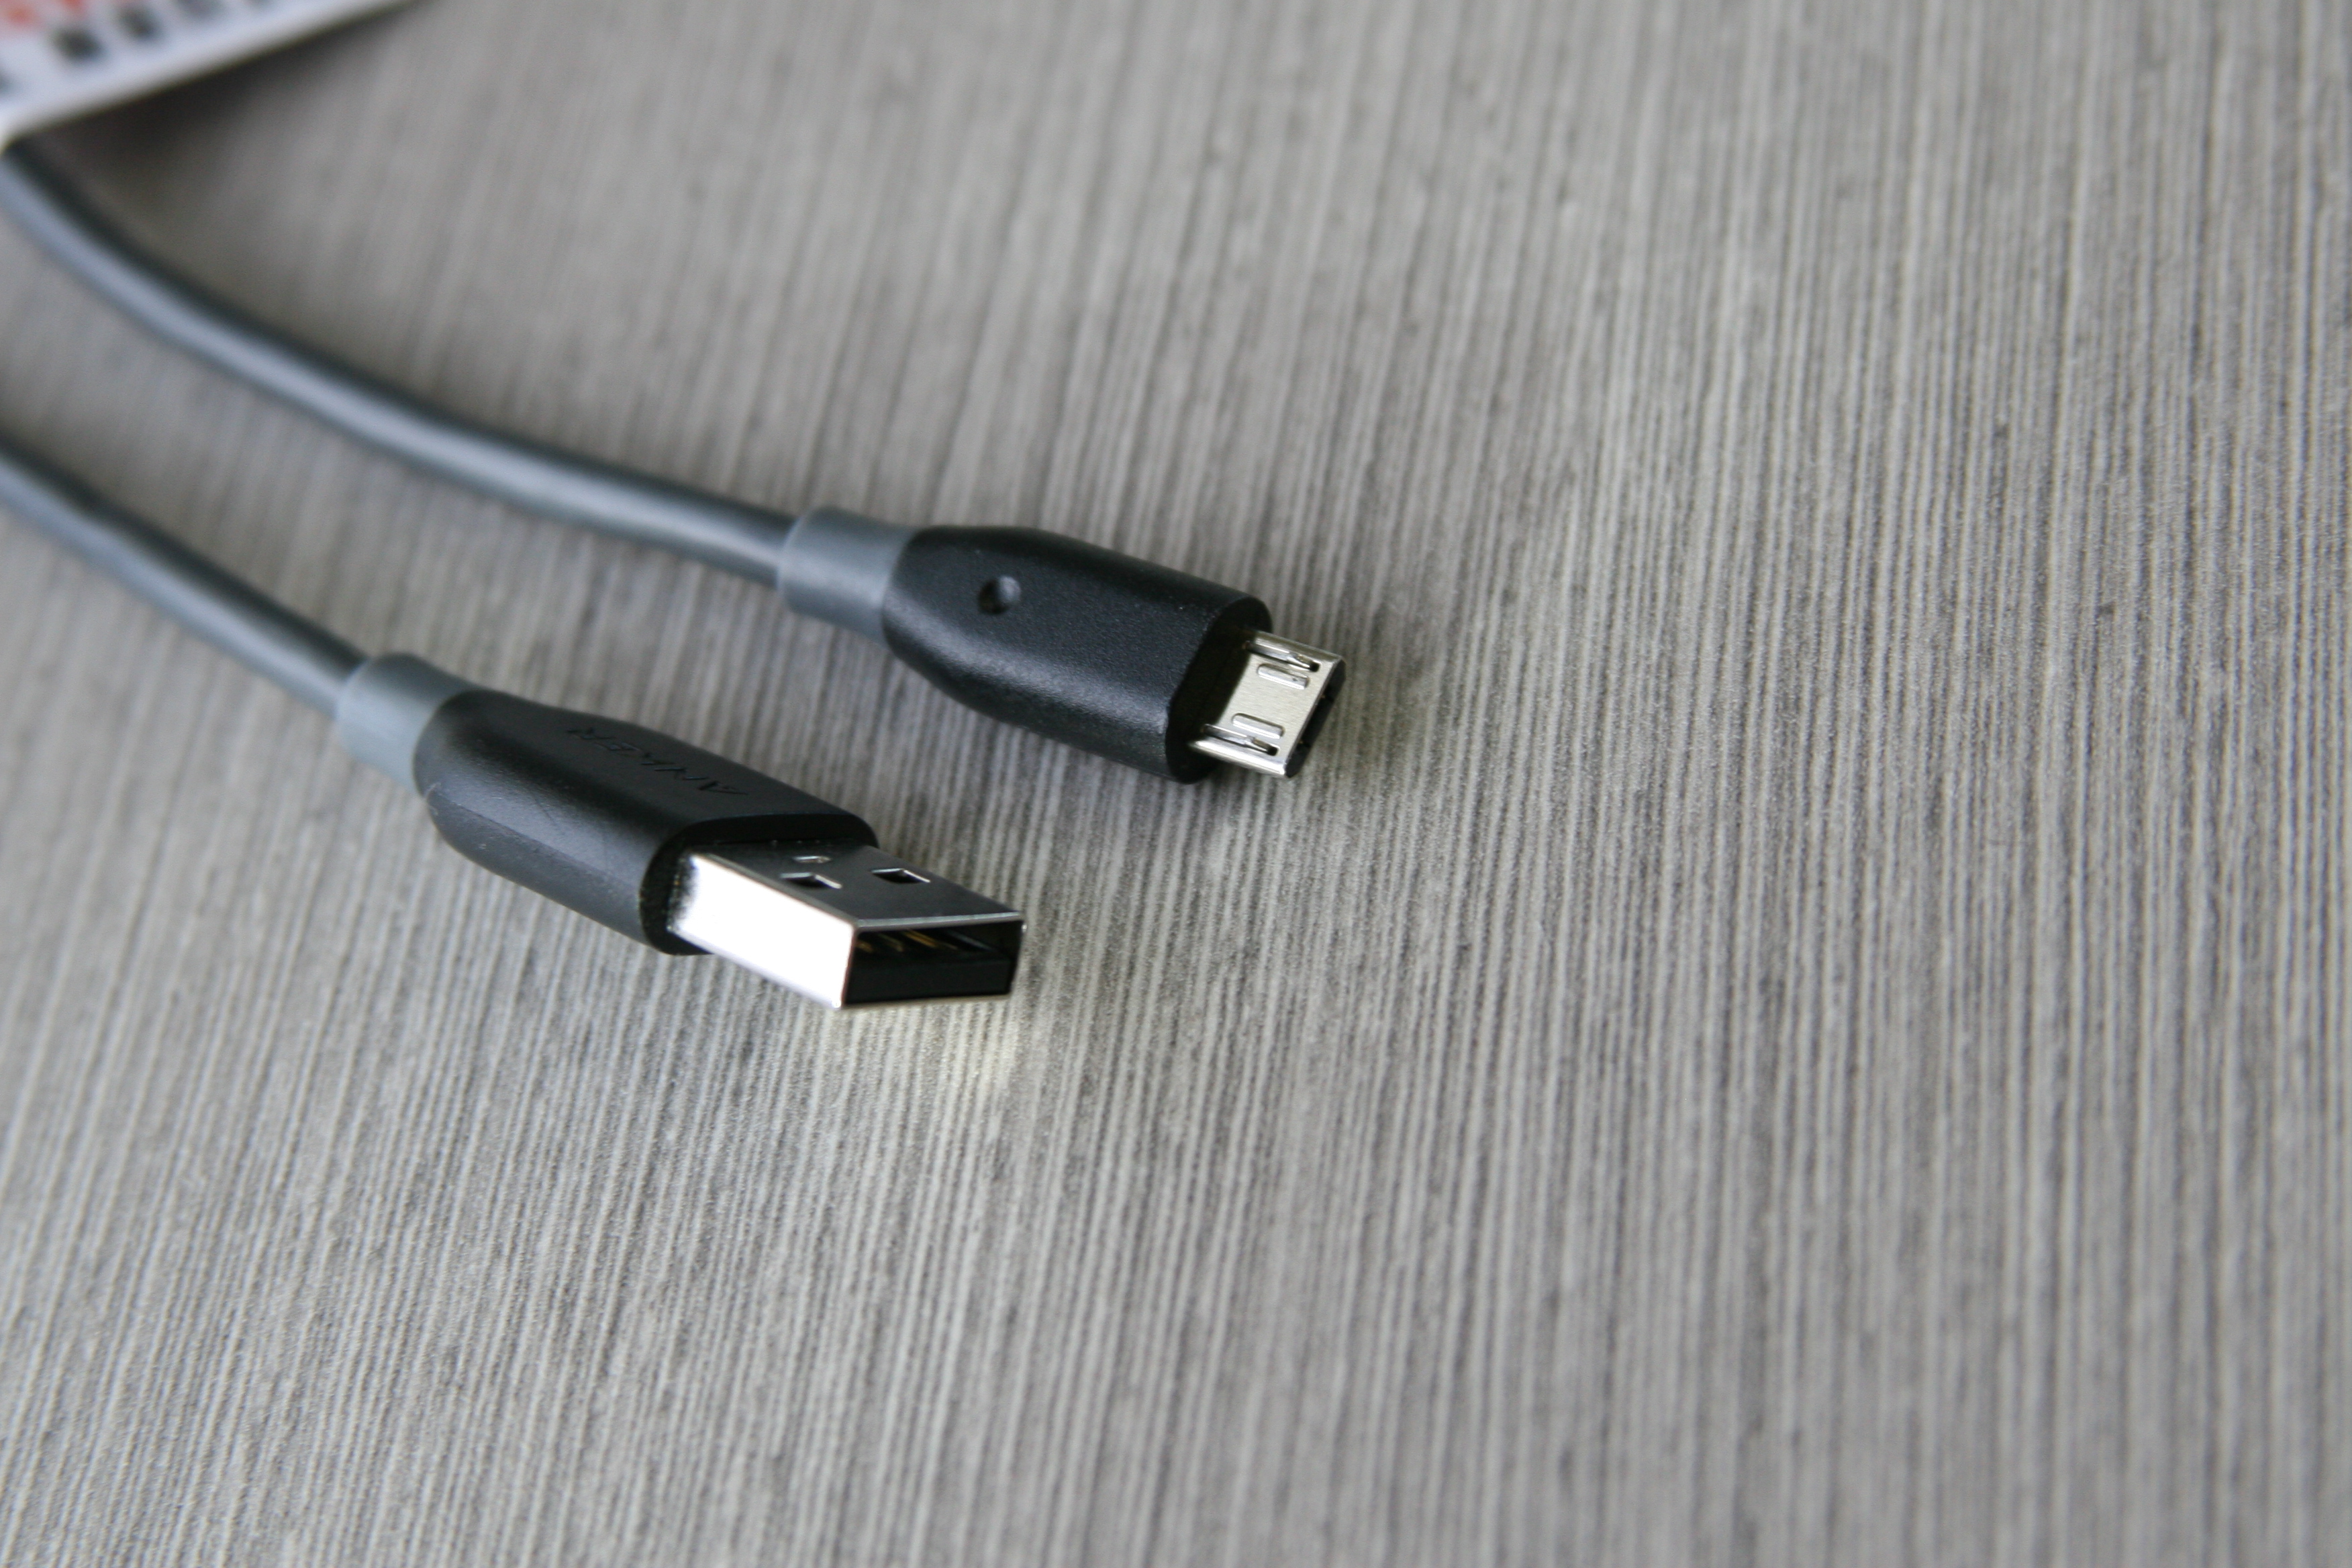 USb to Micro-USB Cable